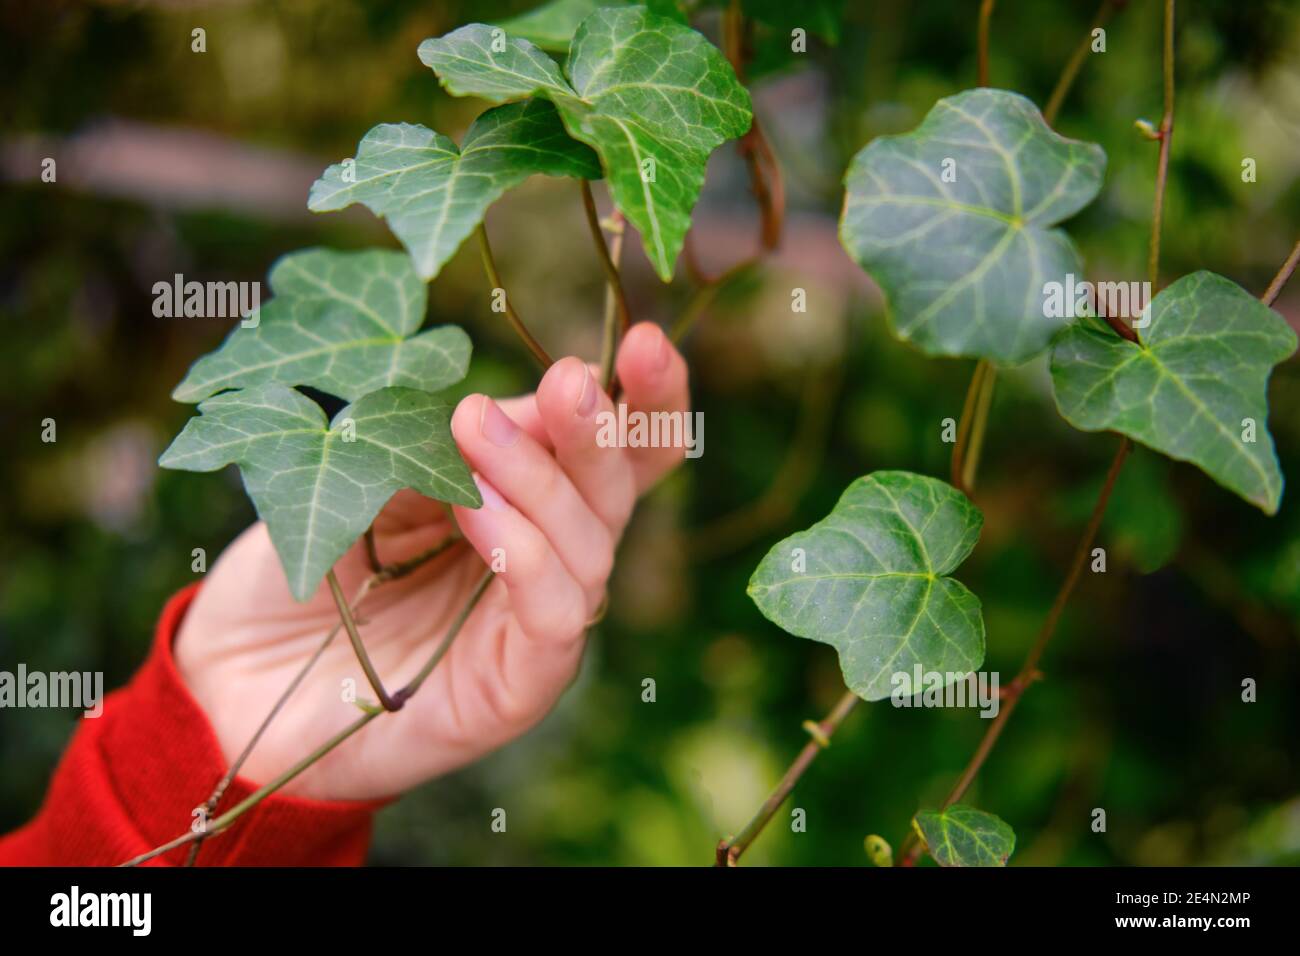 Man florist hands with hedera helix leaf, greenhouse with plants Stock Photo